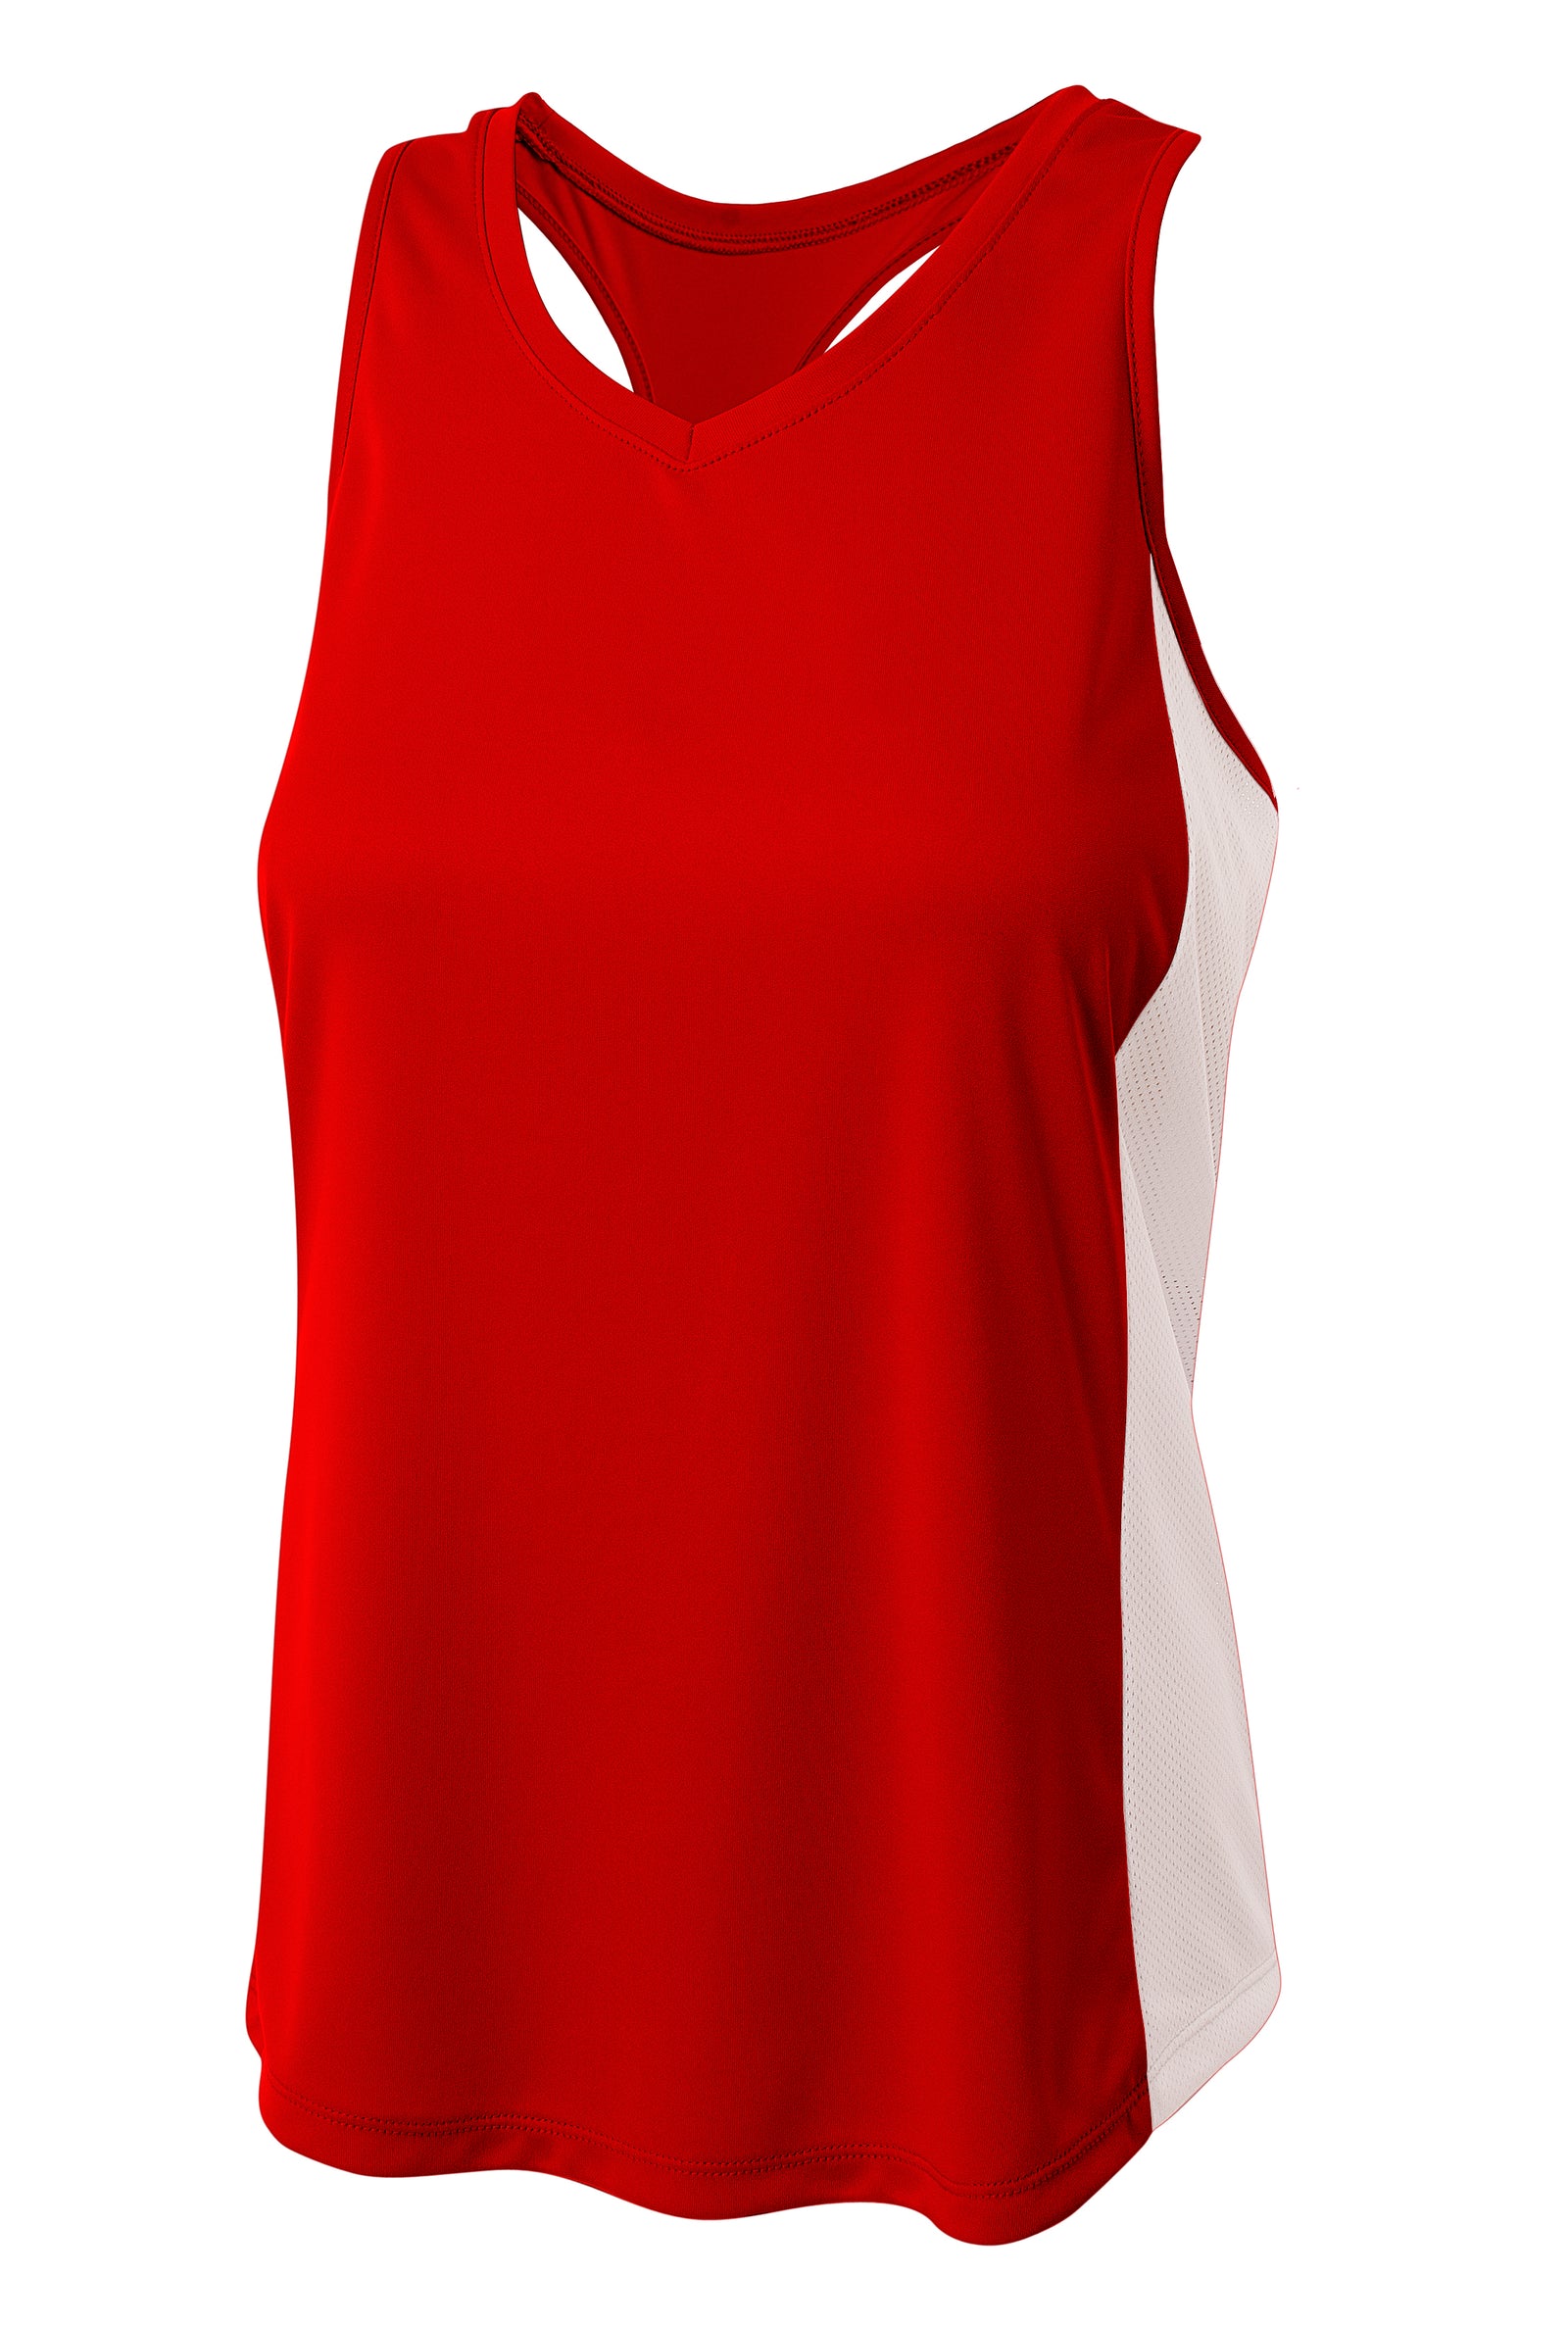 Scarlet/white A4 A4 Pacer Singlet With Racerback